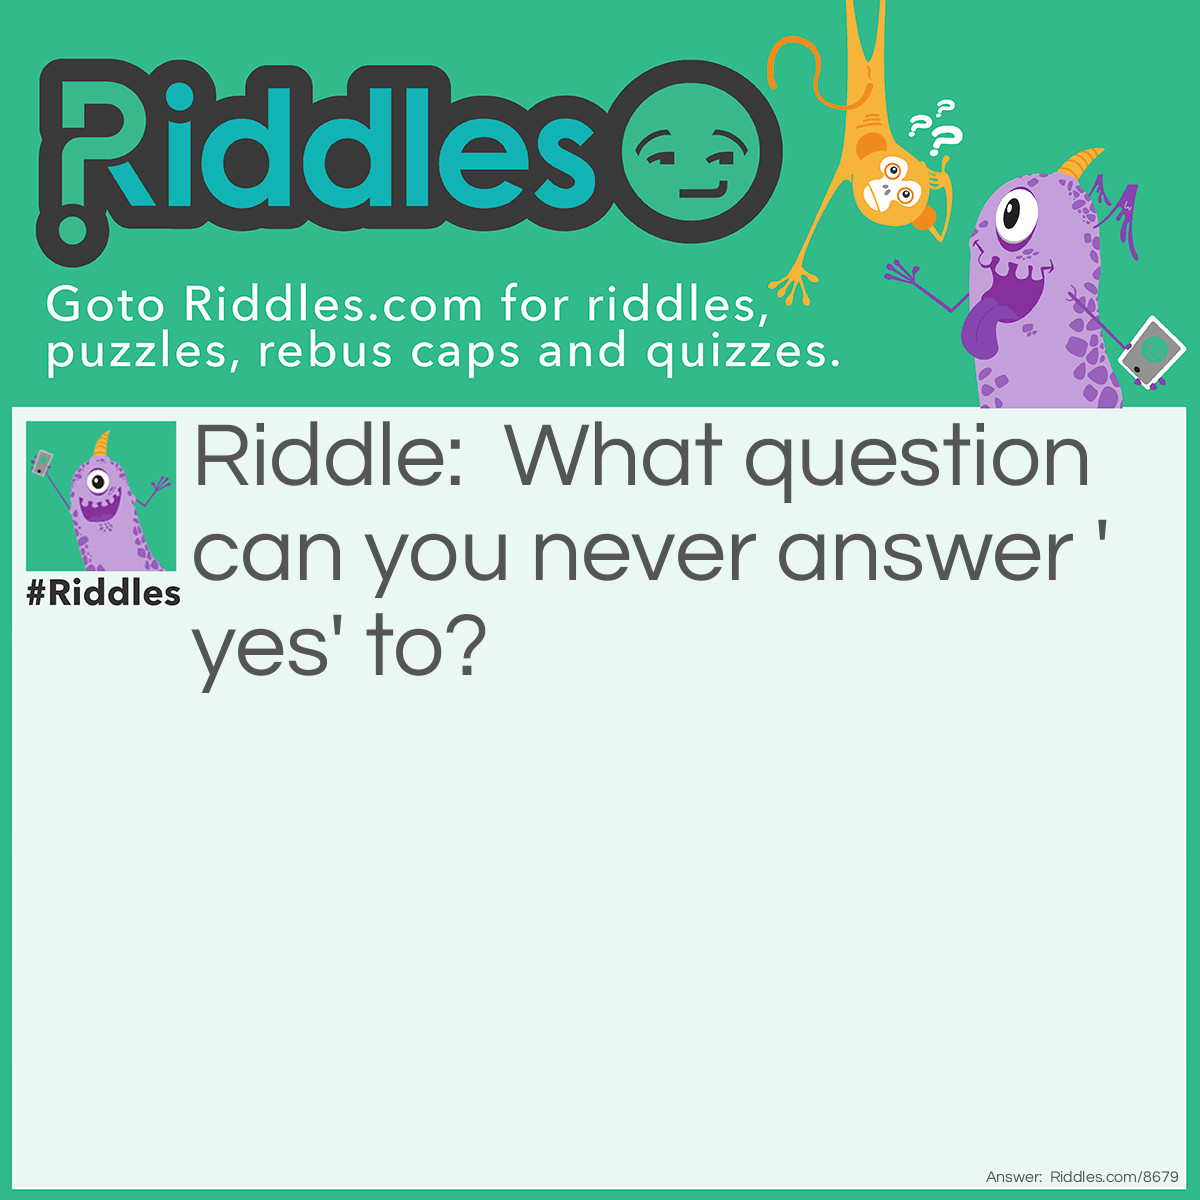 Riddle: What question can you never answer 'yes' to? Answer: Are you asleep yet?